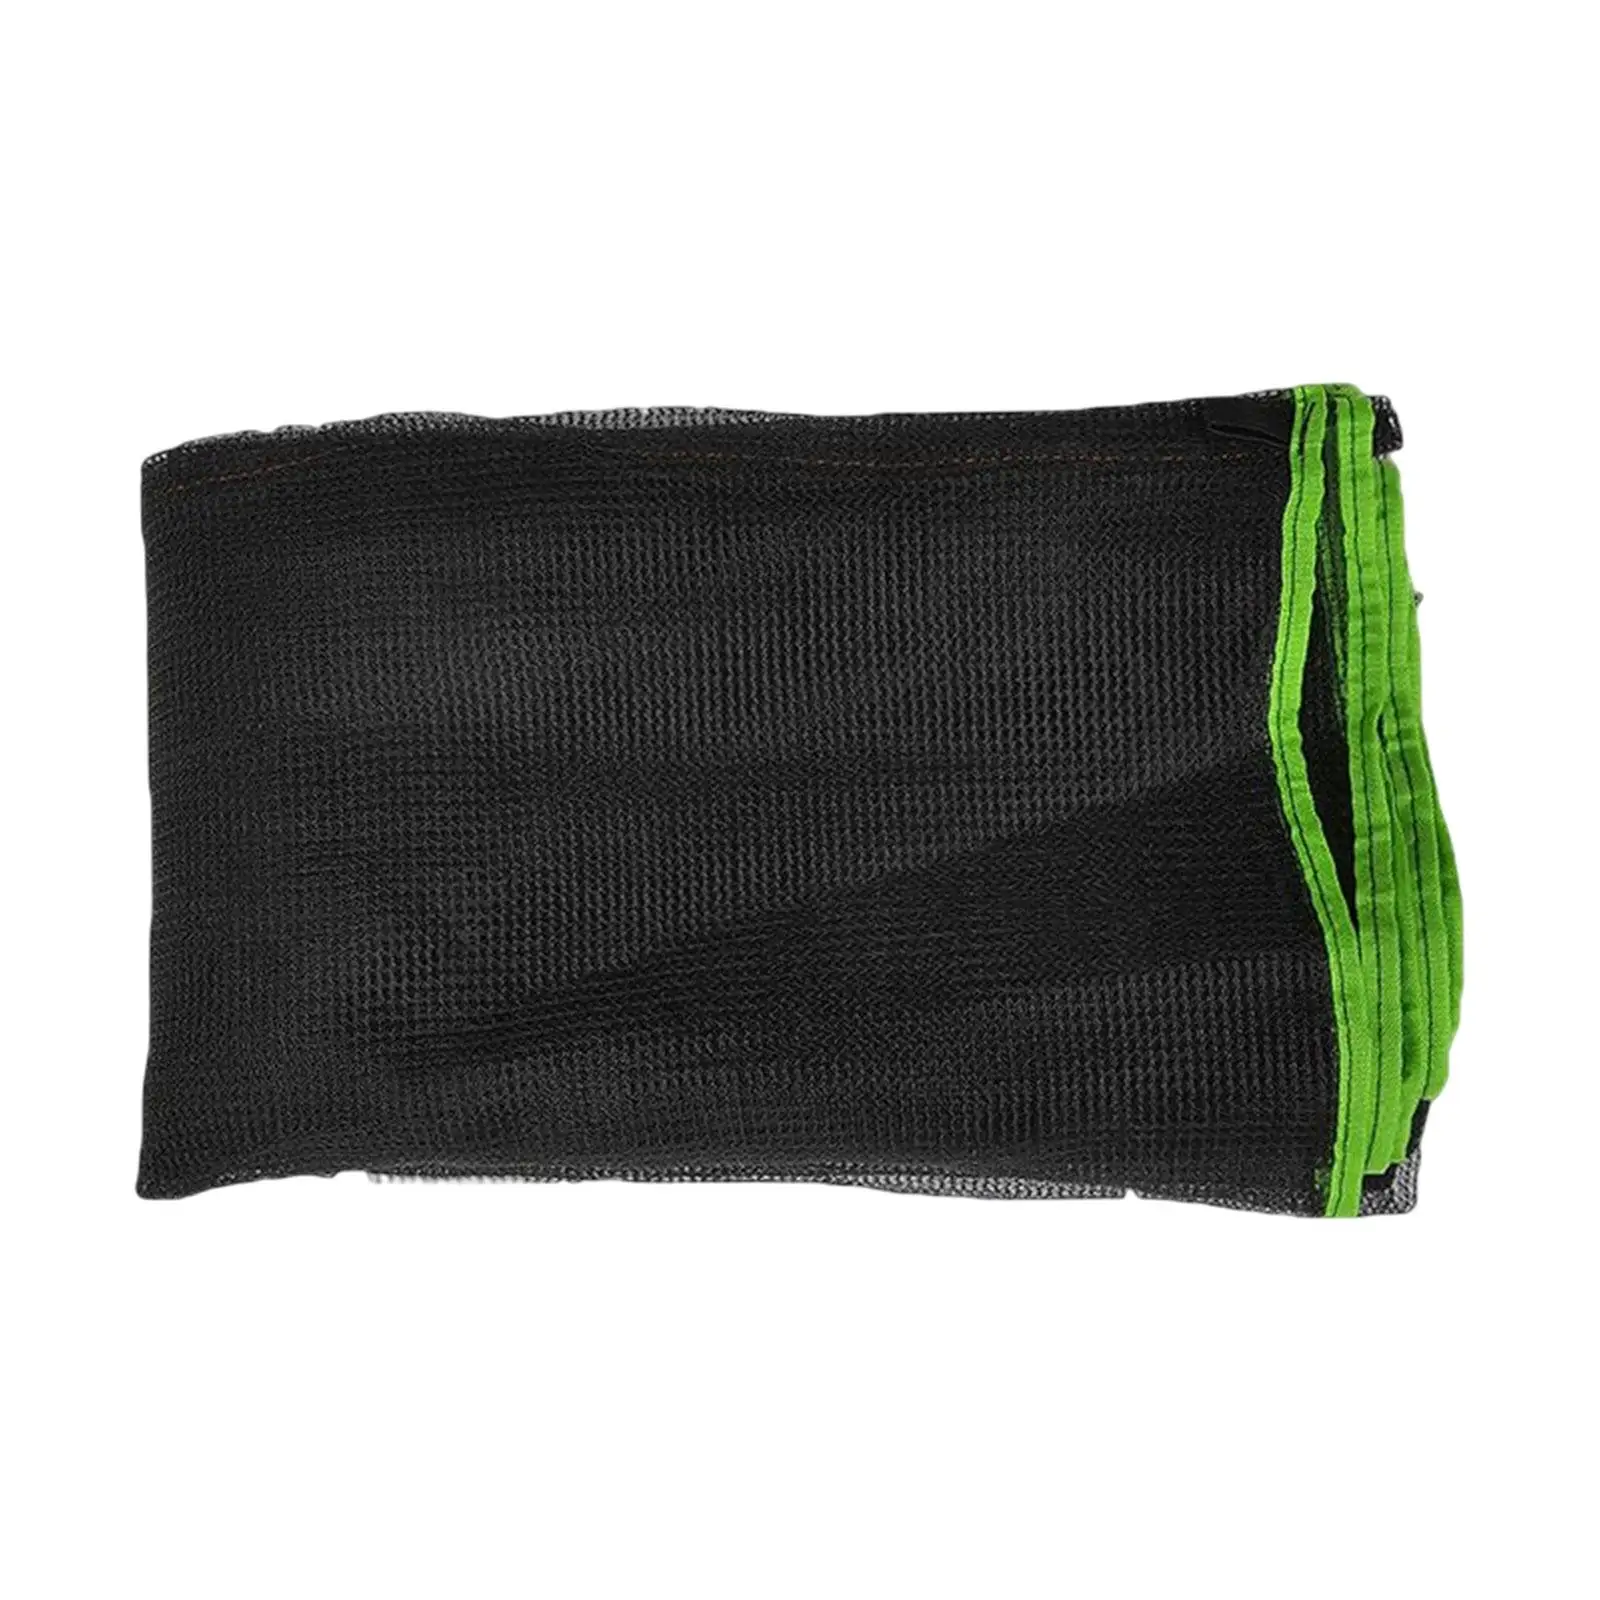 Trampoline Safety Net Round 4.6ft Replacement Trampoline Net Only